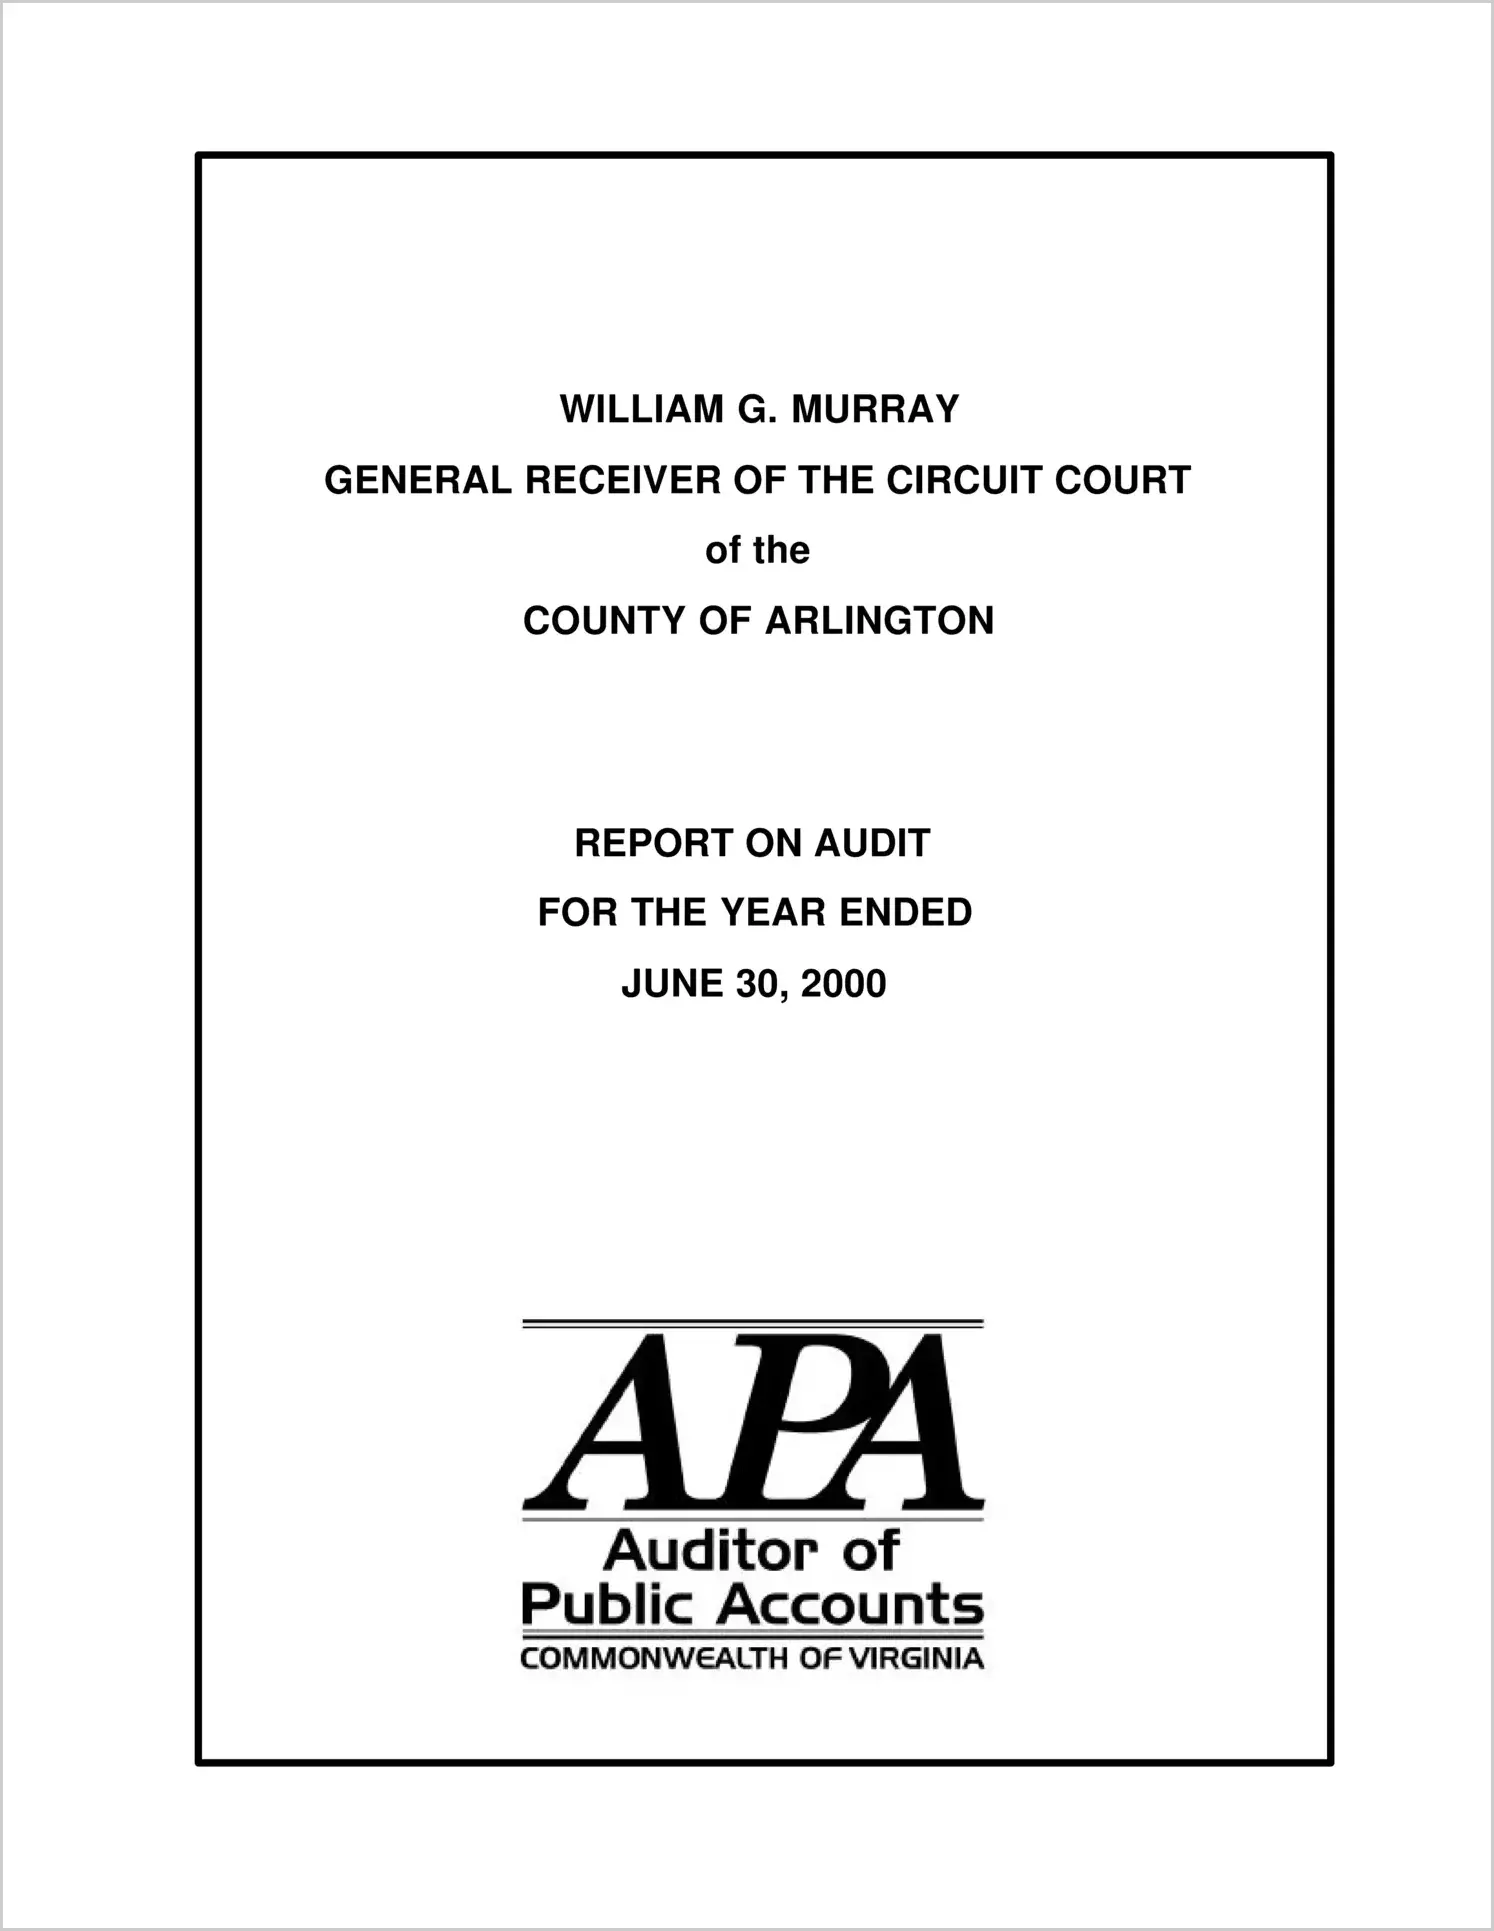 General Receiver of the Circuit Court of the County of Arlington for the period July 1, 1999 through June 30, 2000